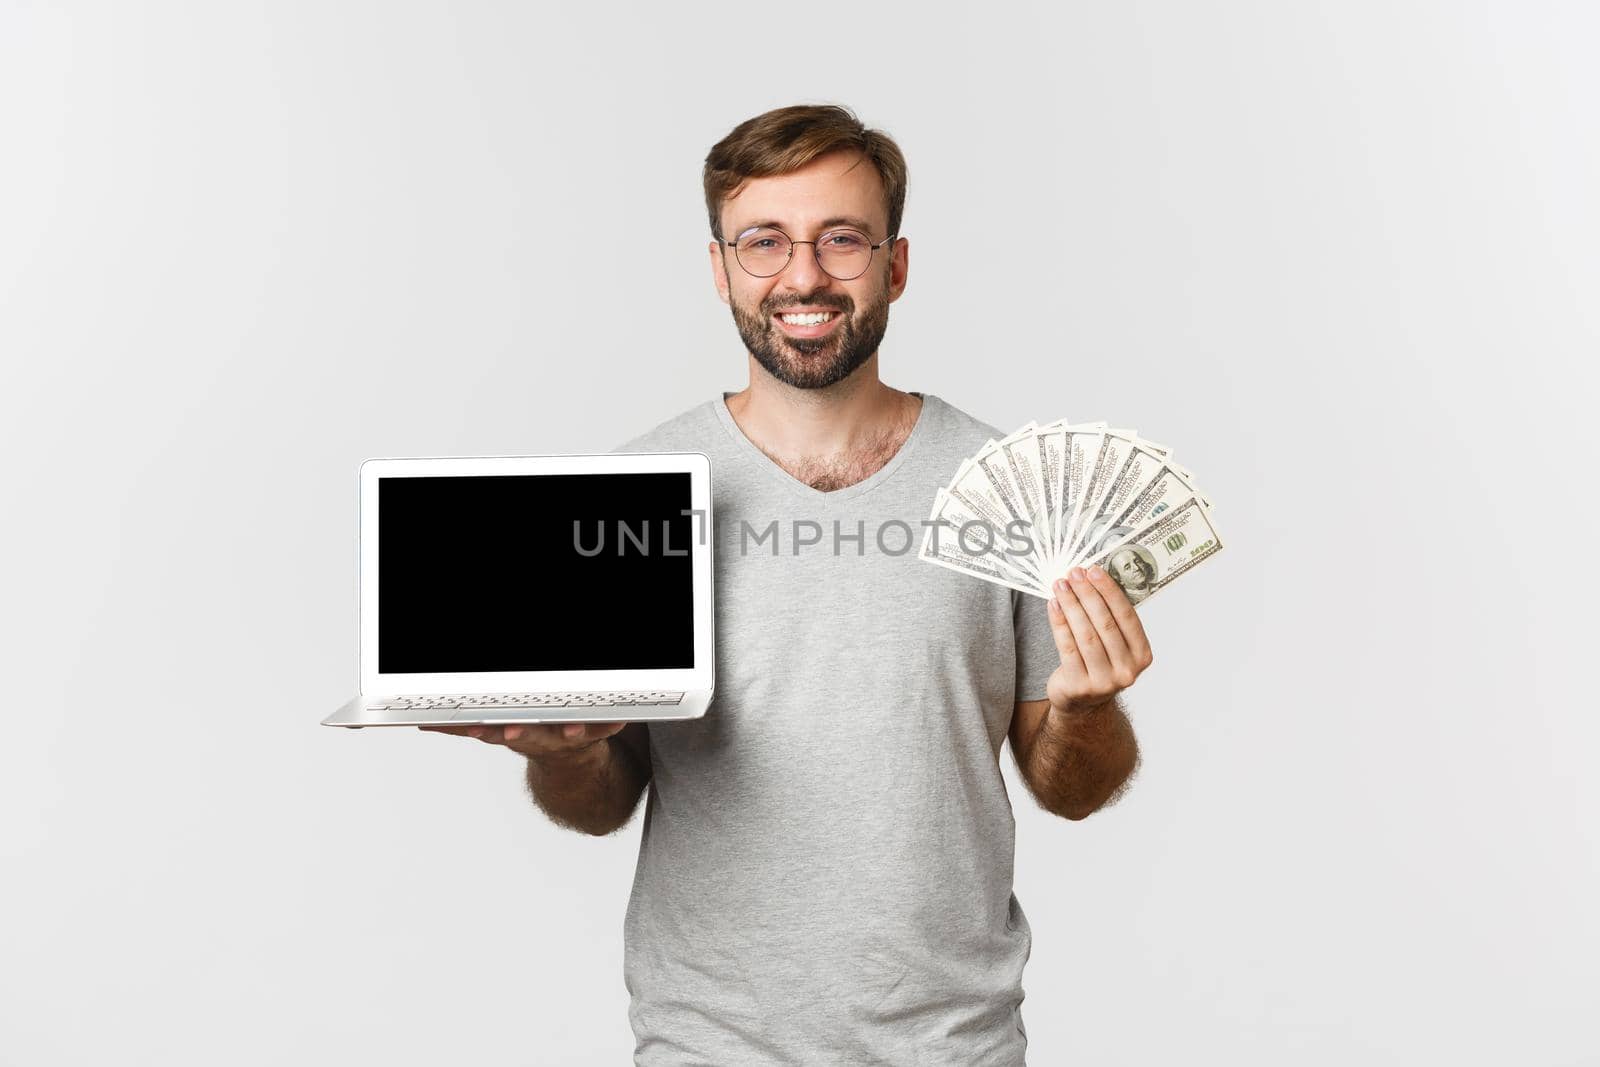 Image of handsome man with beard, working with laptop, networking, holding money and smiling, standing over white background.